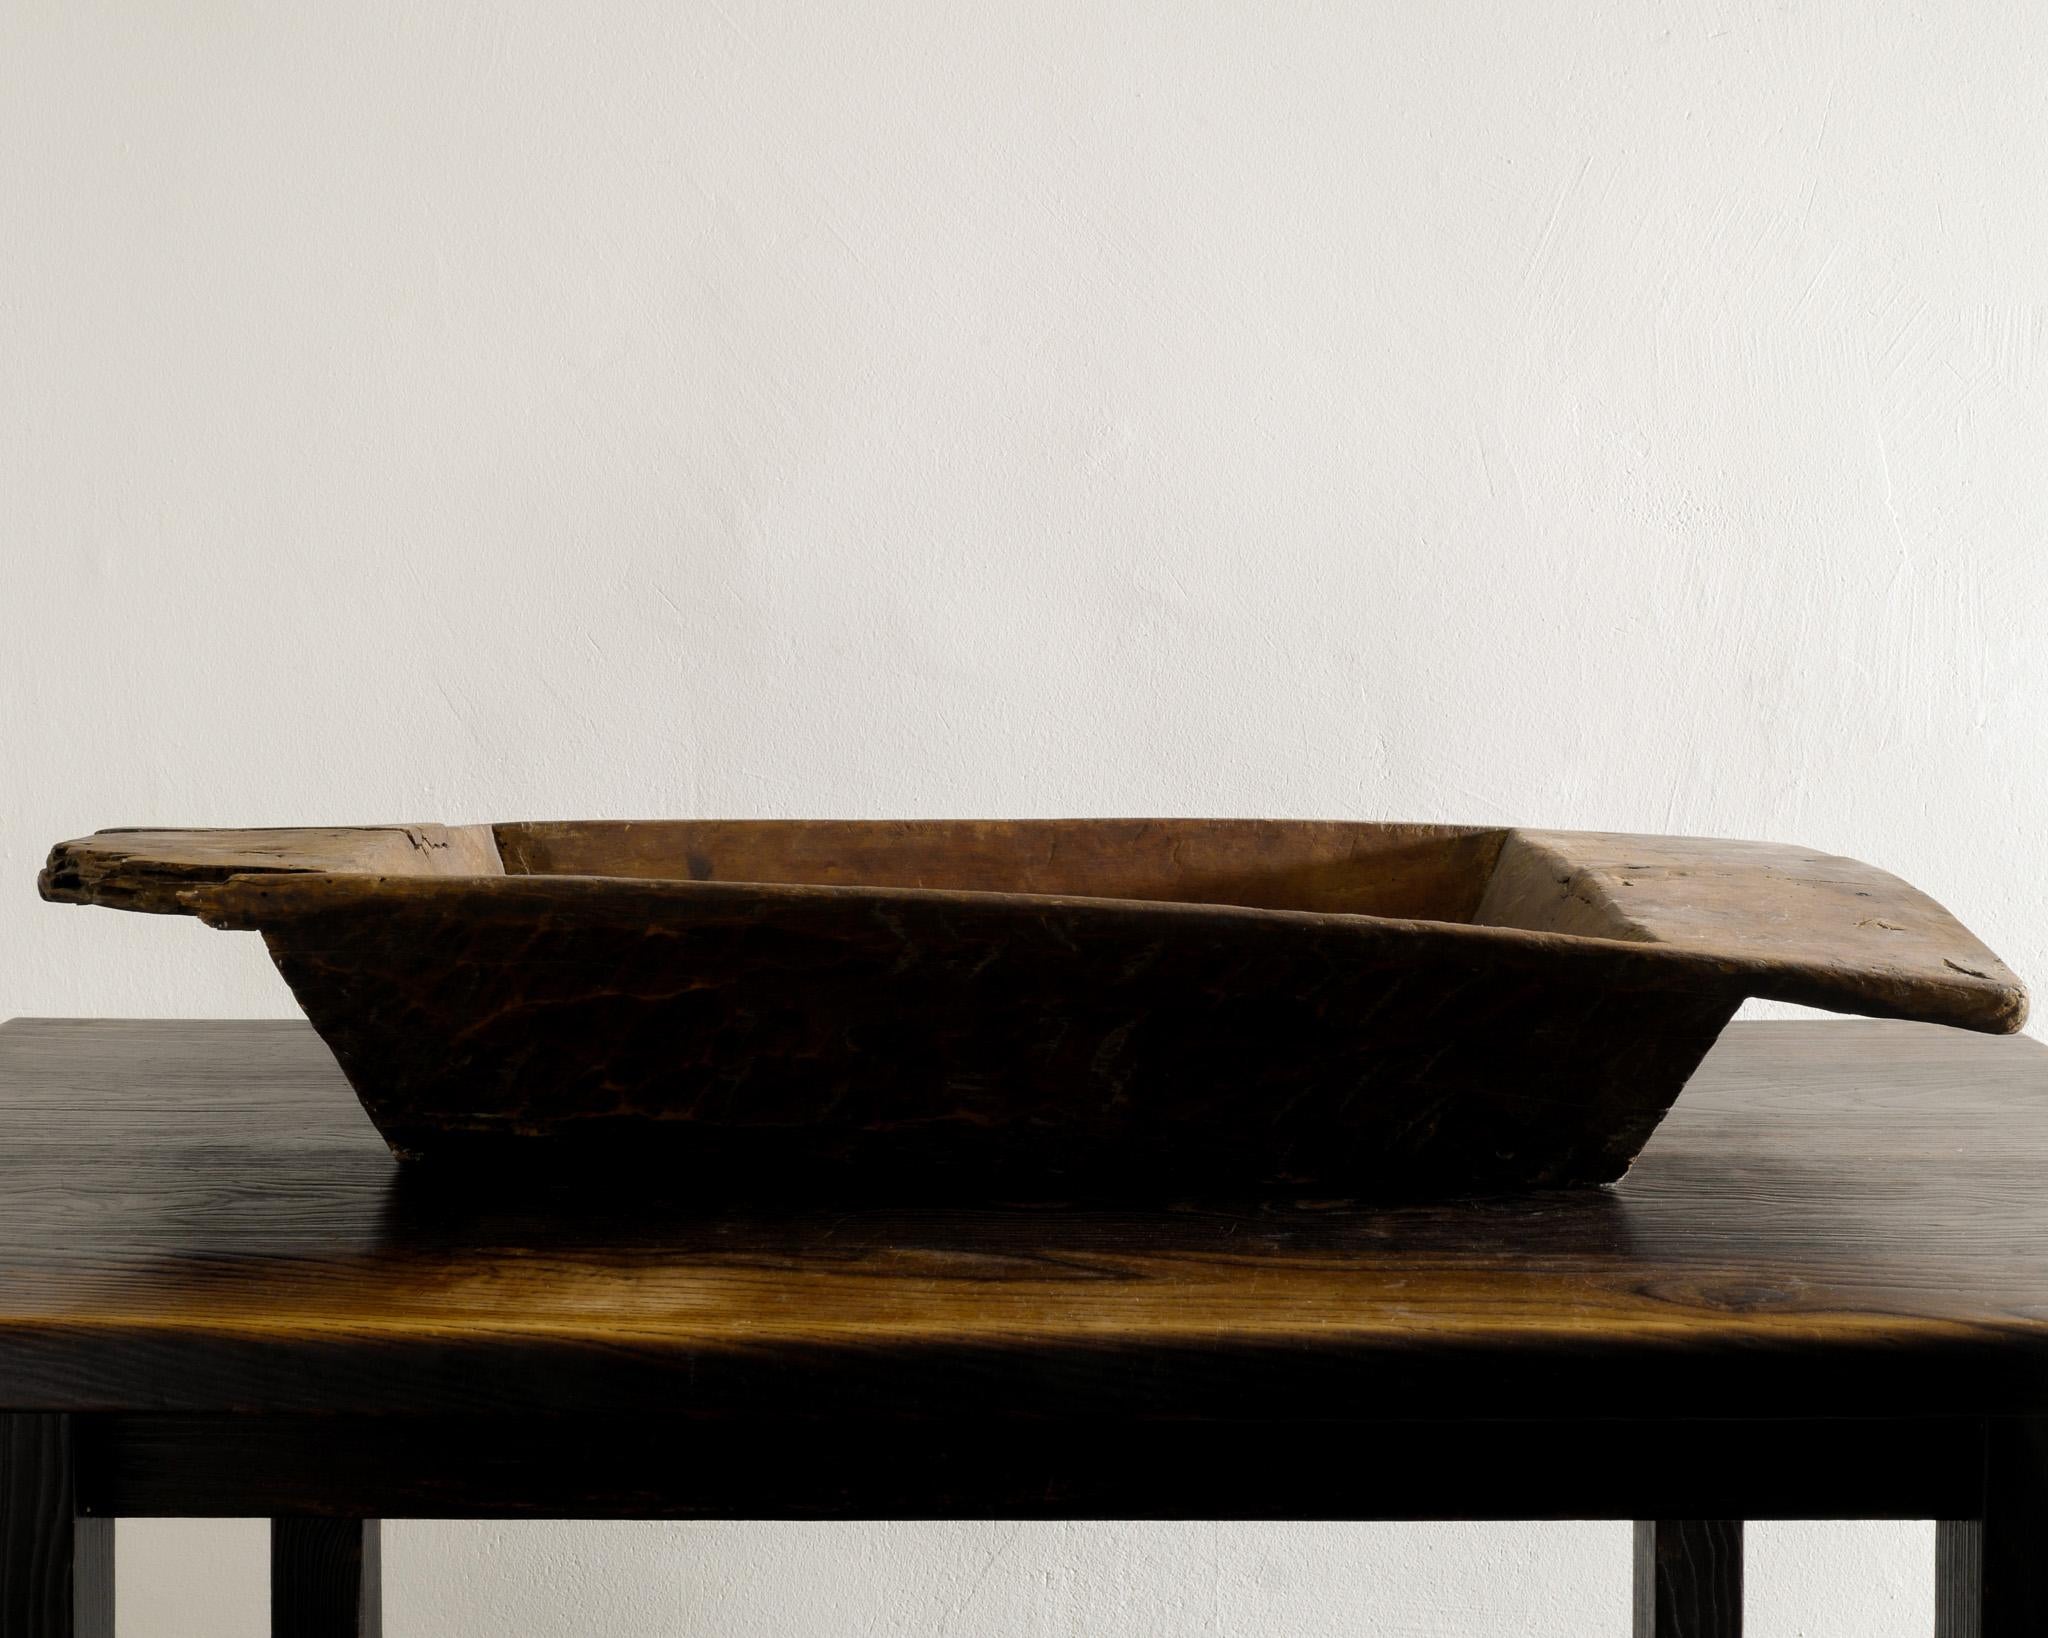 Scandinavian Modern Antique Swedish Wooden Tray in a Brutalist and Primitive Style, Late 1800s For Sale